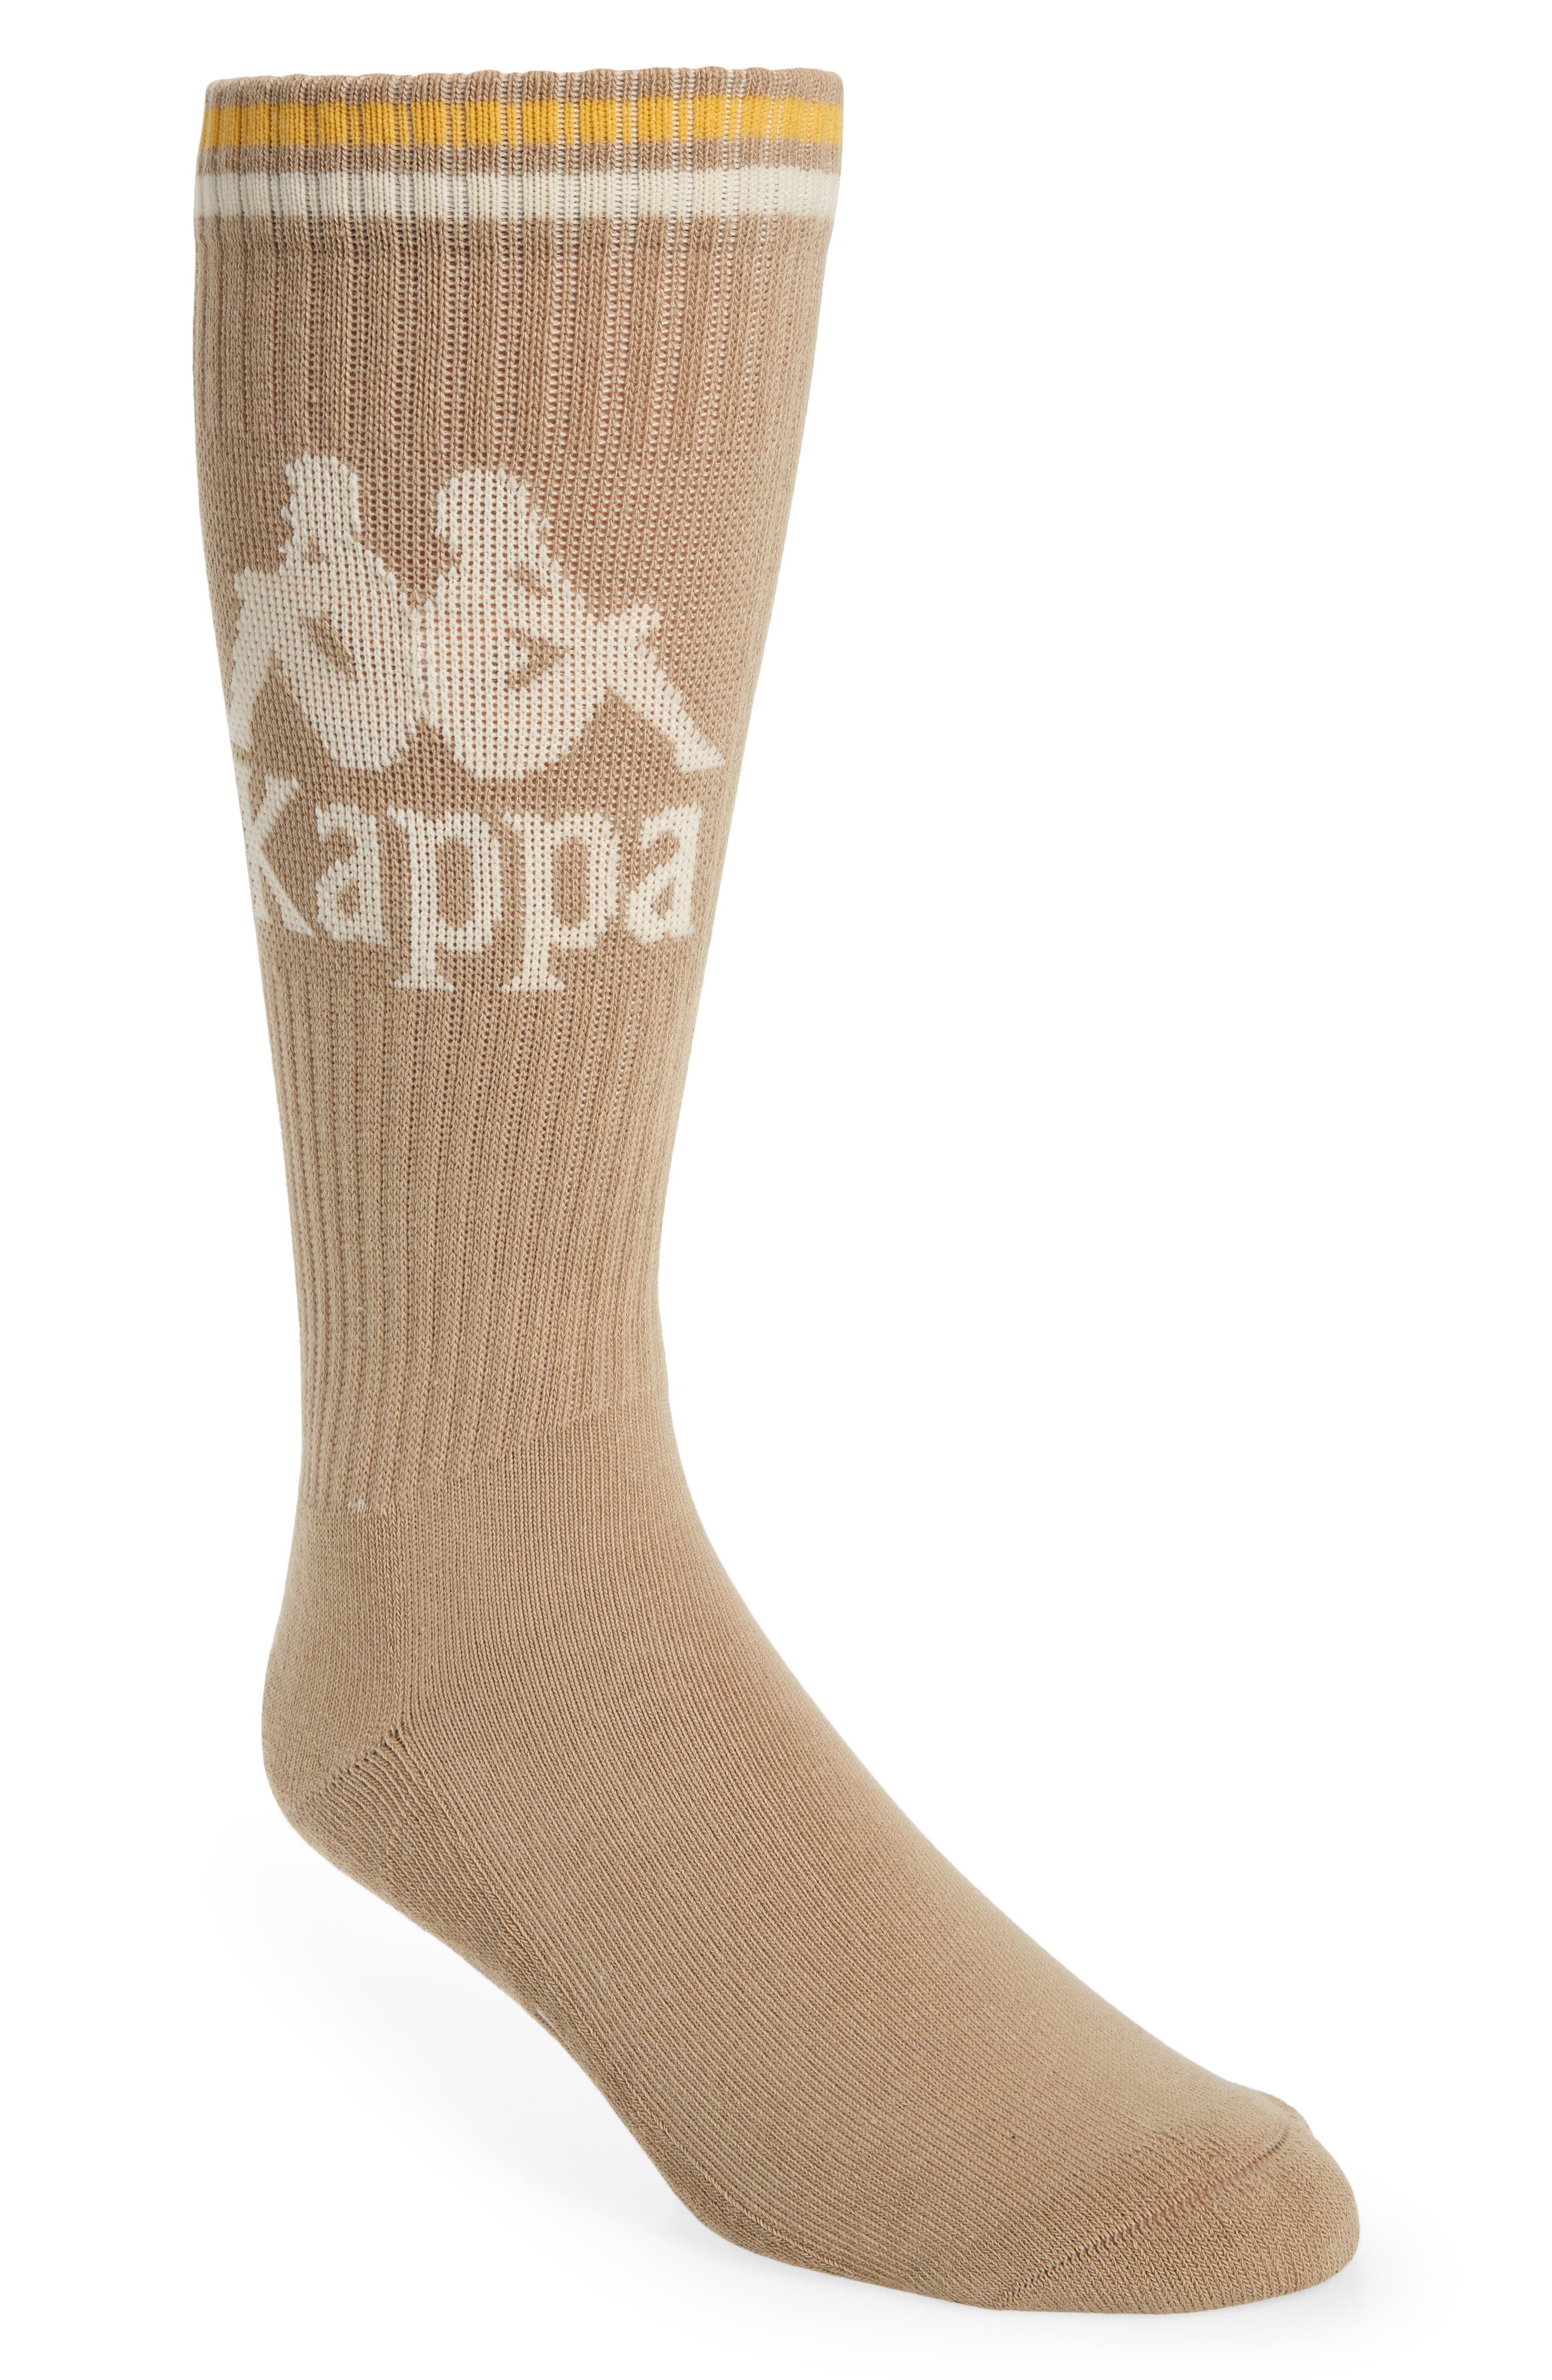 Kappa Authentic Aster Logo Crew Socks in Beige-Yellow-Beige-White at Nordstrom, Size Large